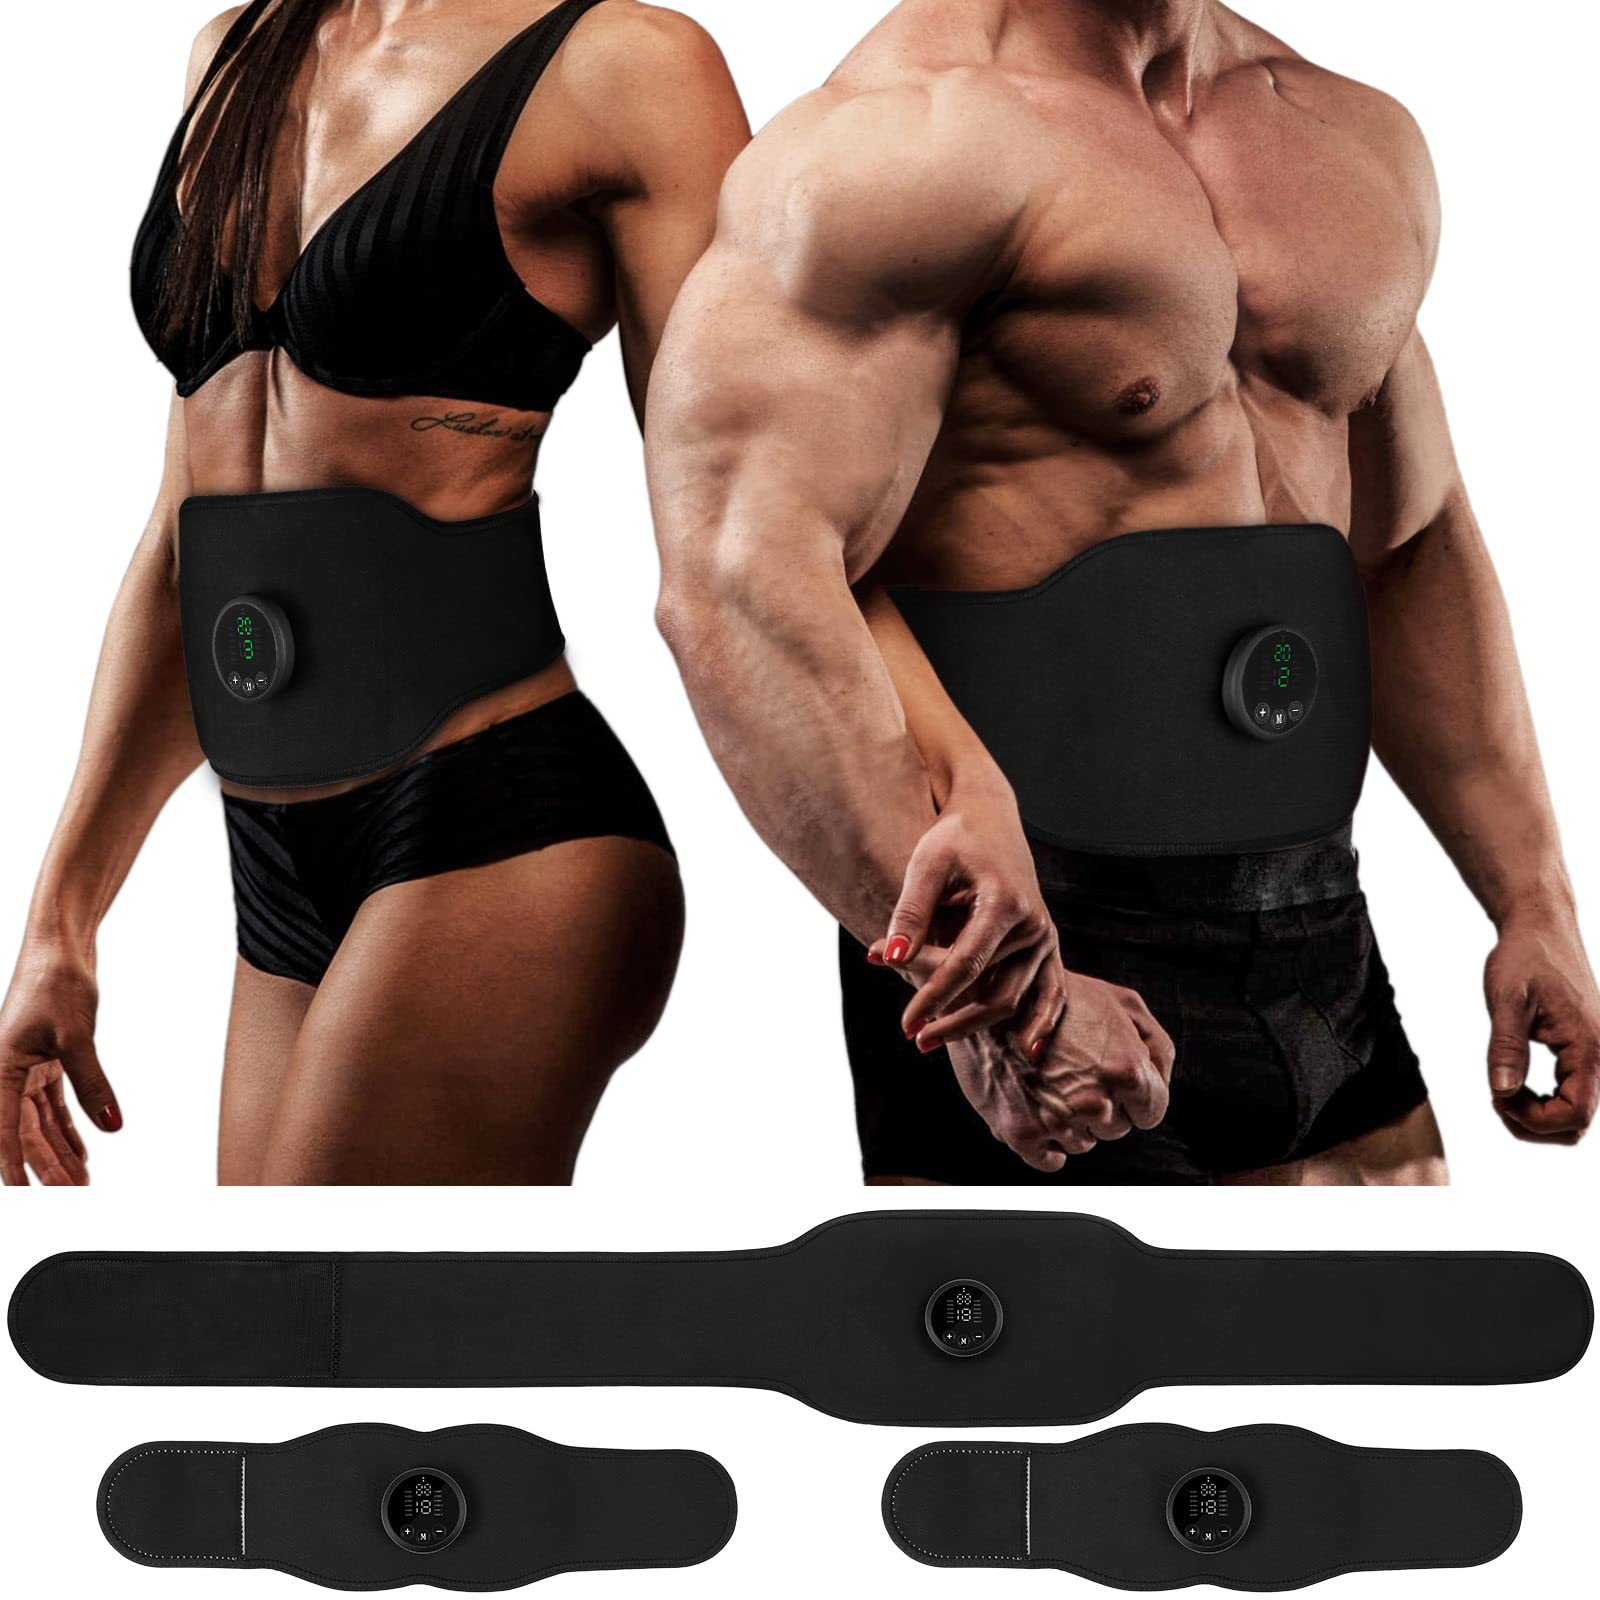 FOPIE ABS Stimulator, Abdominal Toning Belt Portable Muscle Toner Waist  Trainer Fitness Trimmer Workout Equipment for Home